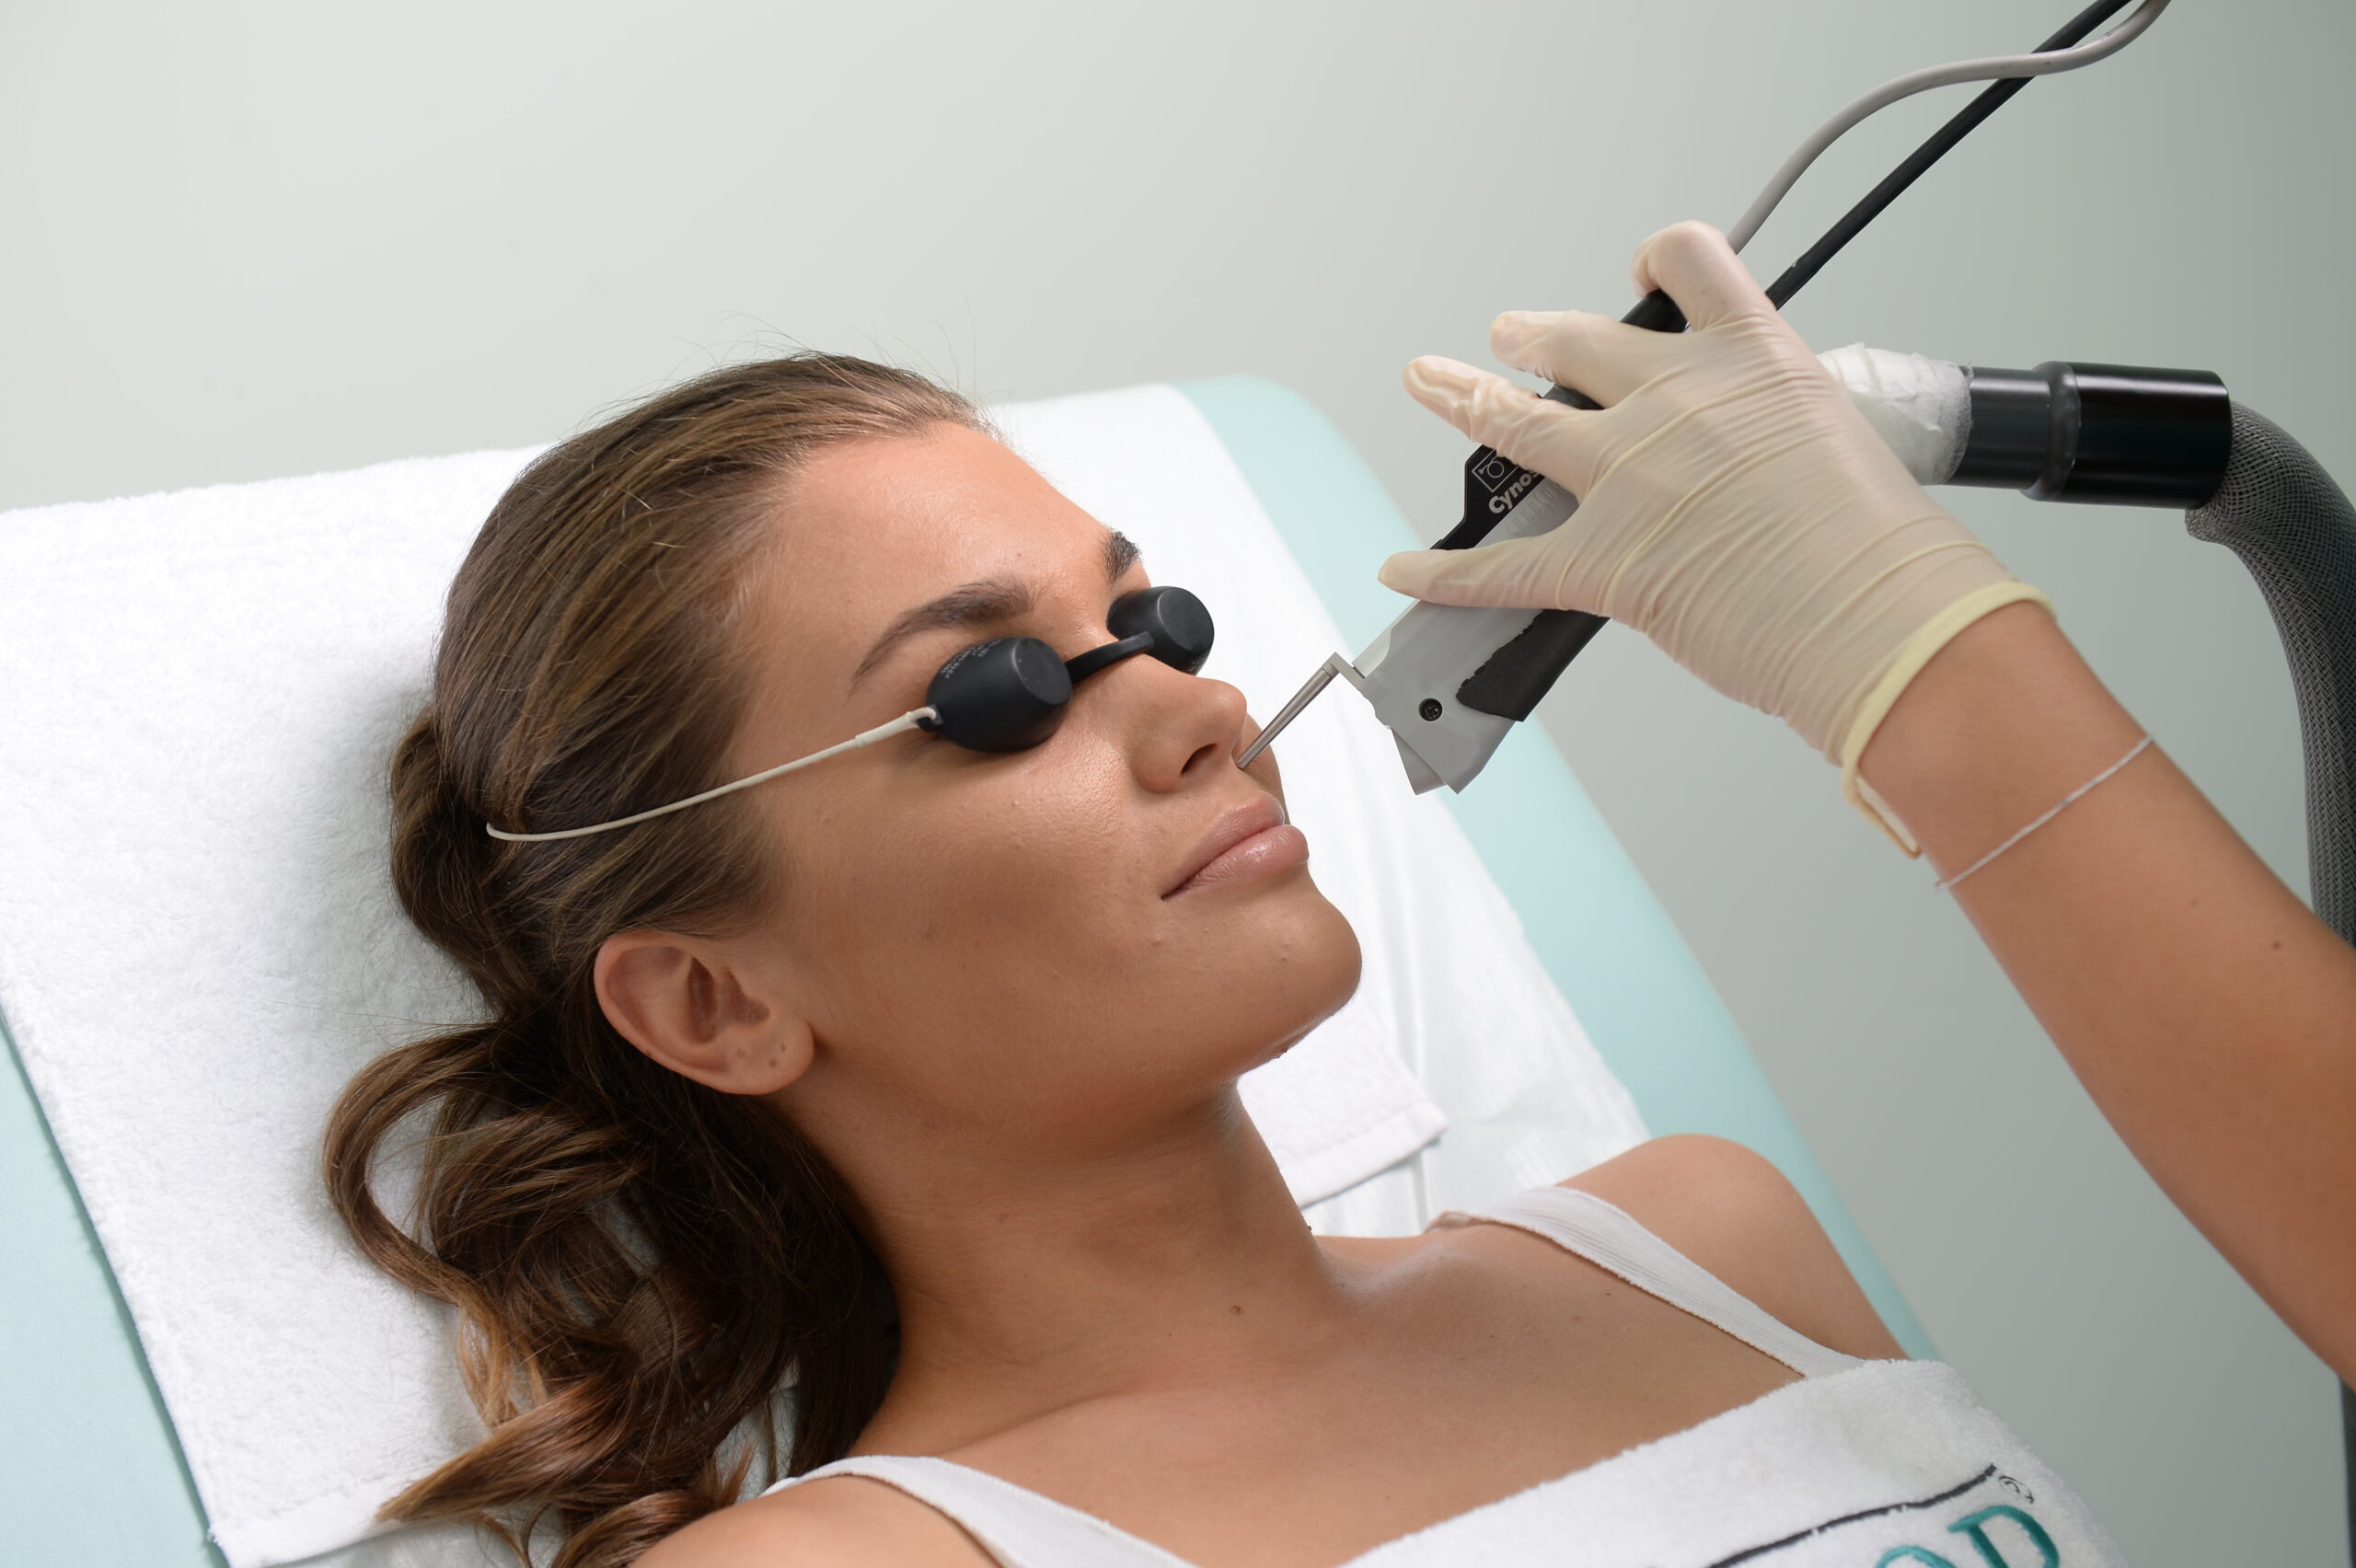 Facial Hair Removal: To Laser or not to Laser for Women. Should I laser my face??